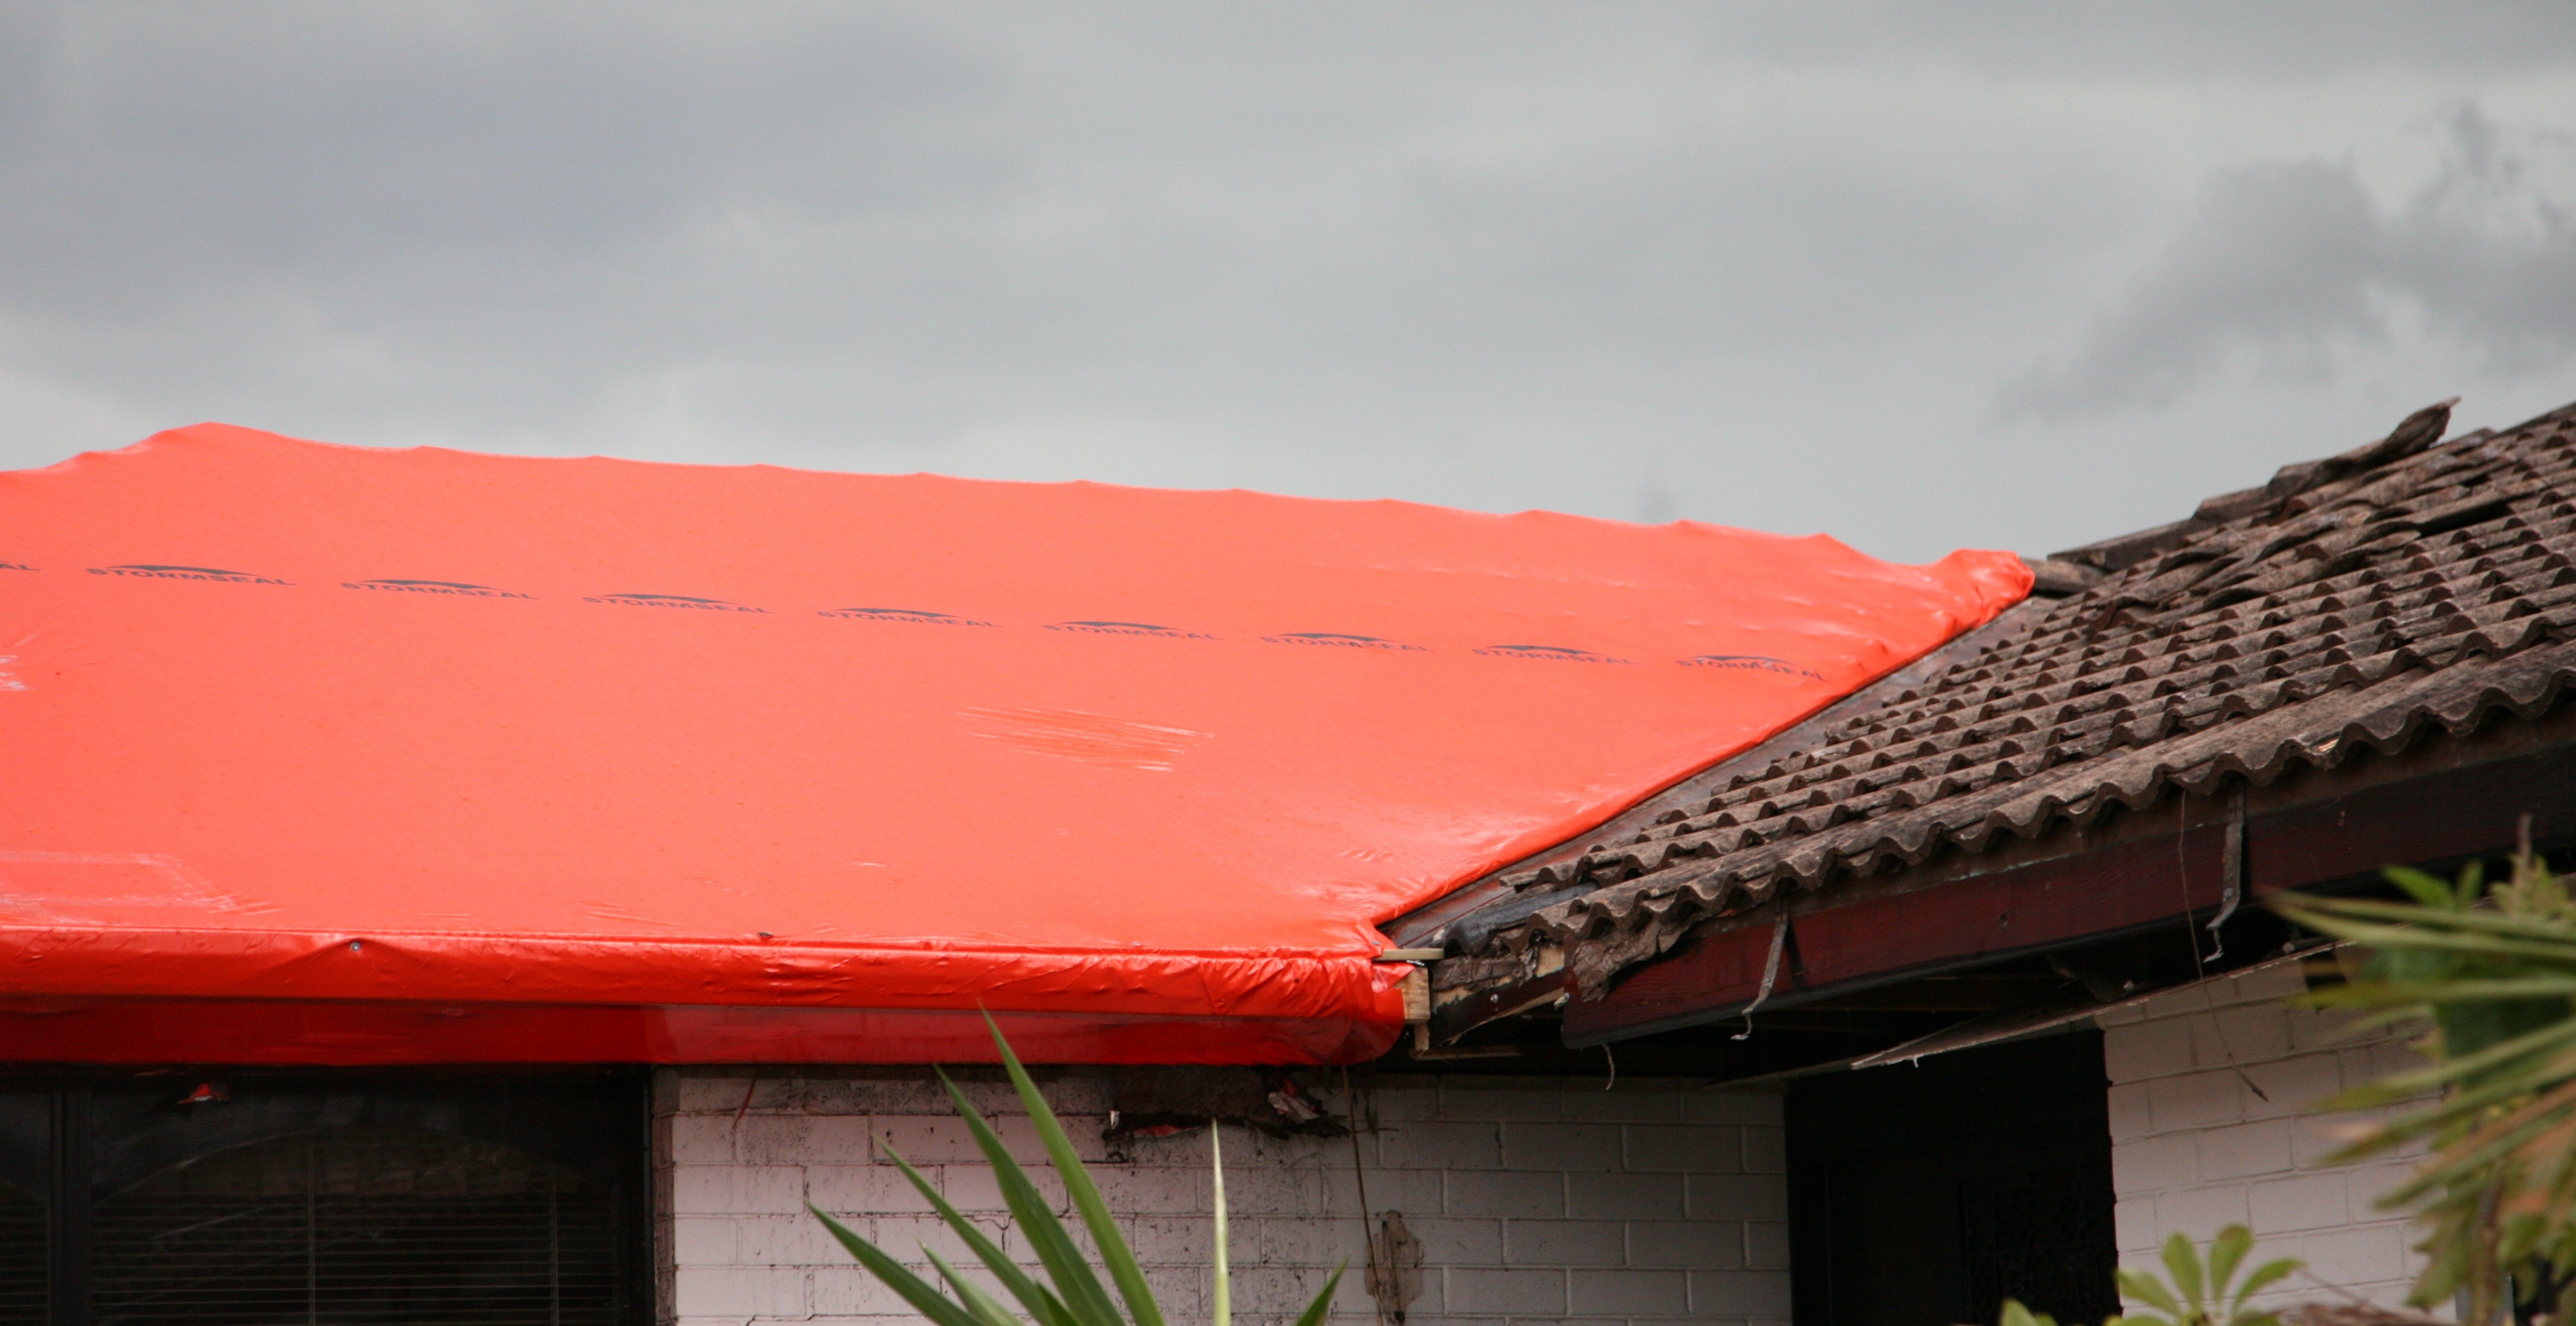 Stormseal for Emergencies: Stormseal weatherproofs buildings to prevent costly further damage